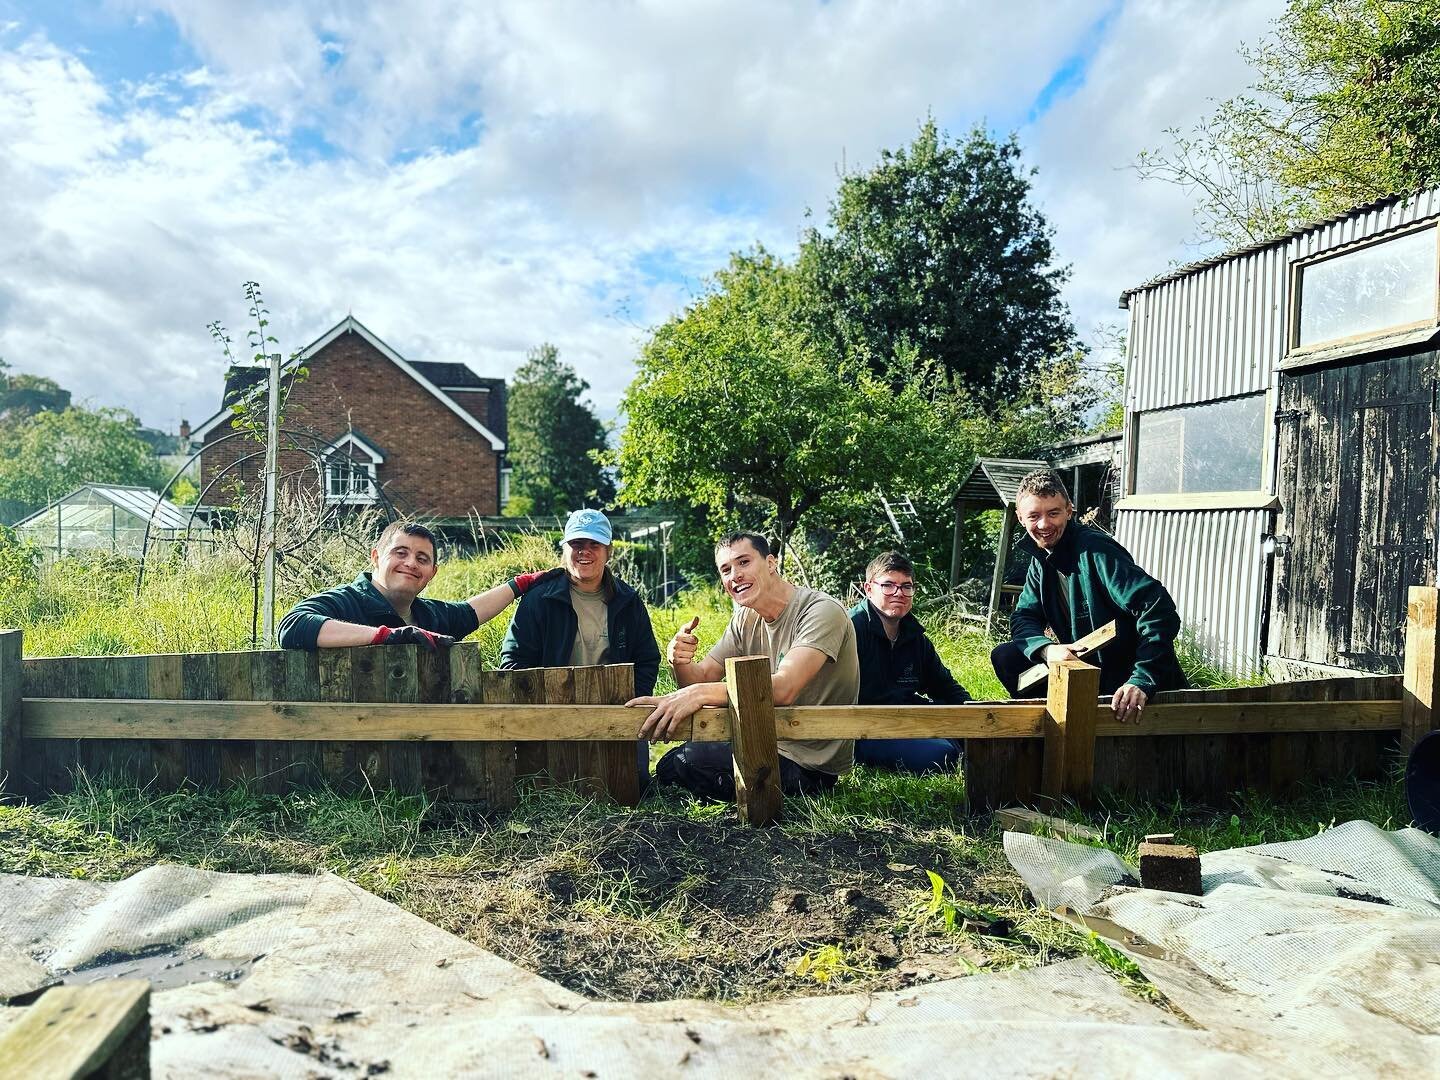 Don&rsquo;t we look fancy in our new GSP clothing! We&rsquo;ve been super busy and the allotment is looking great 💚 #allotmentlife #allotmentuk #autumnvibes🍁